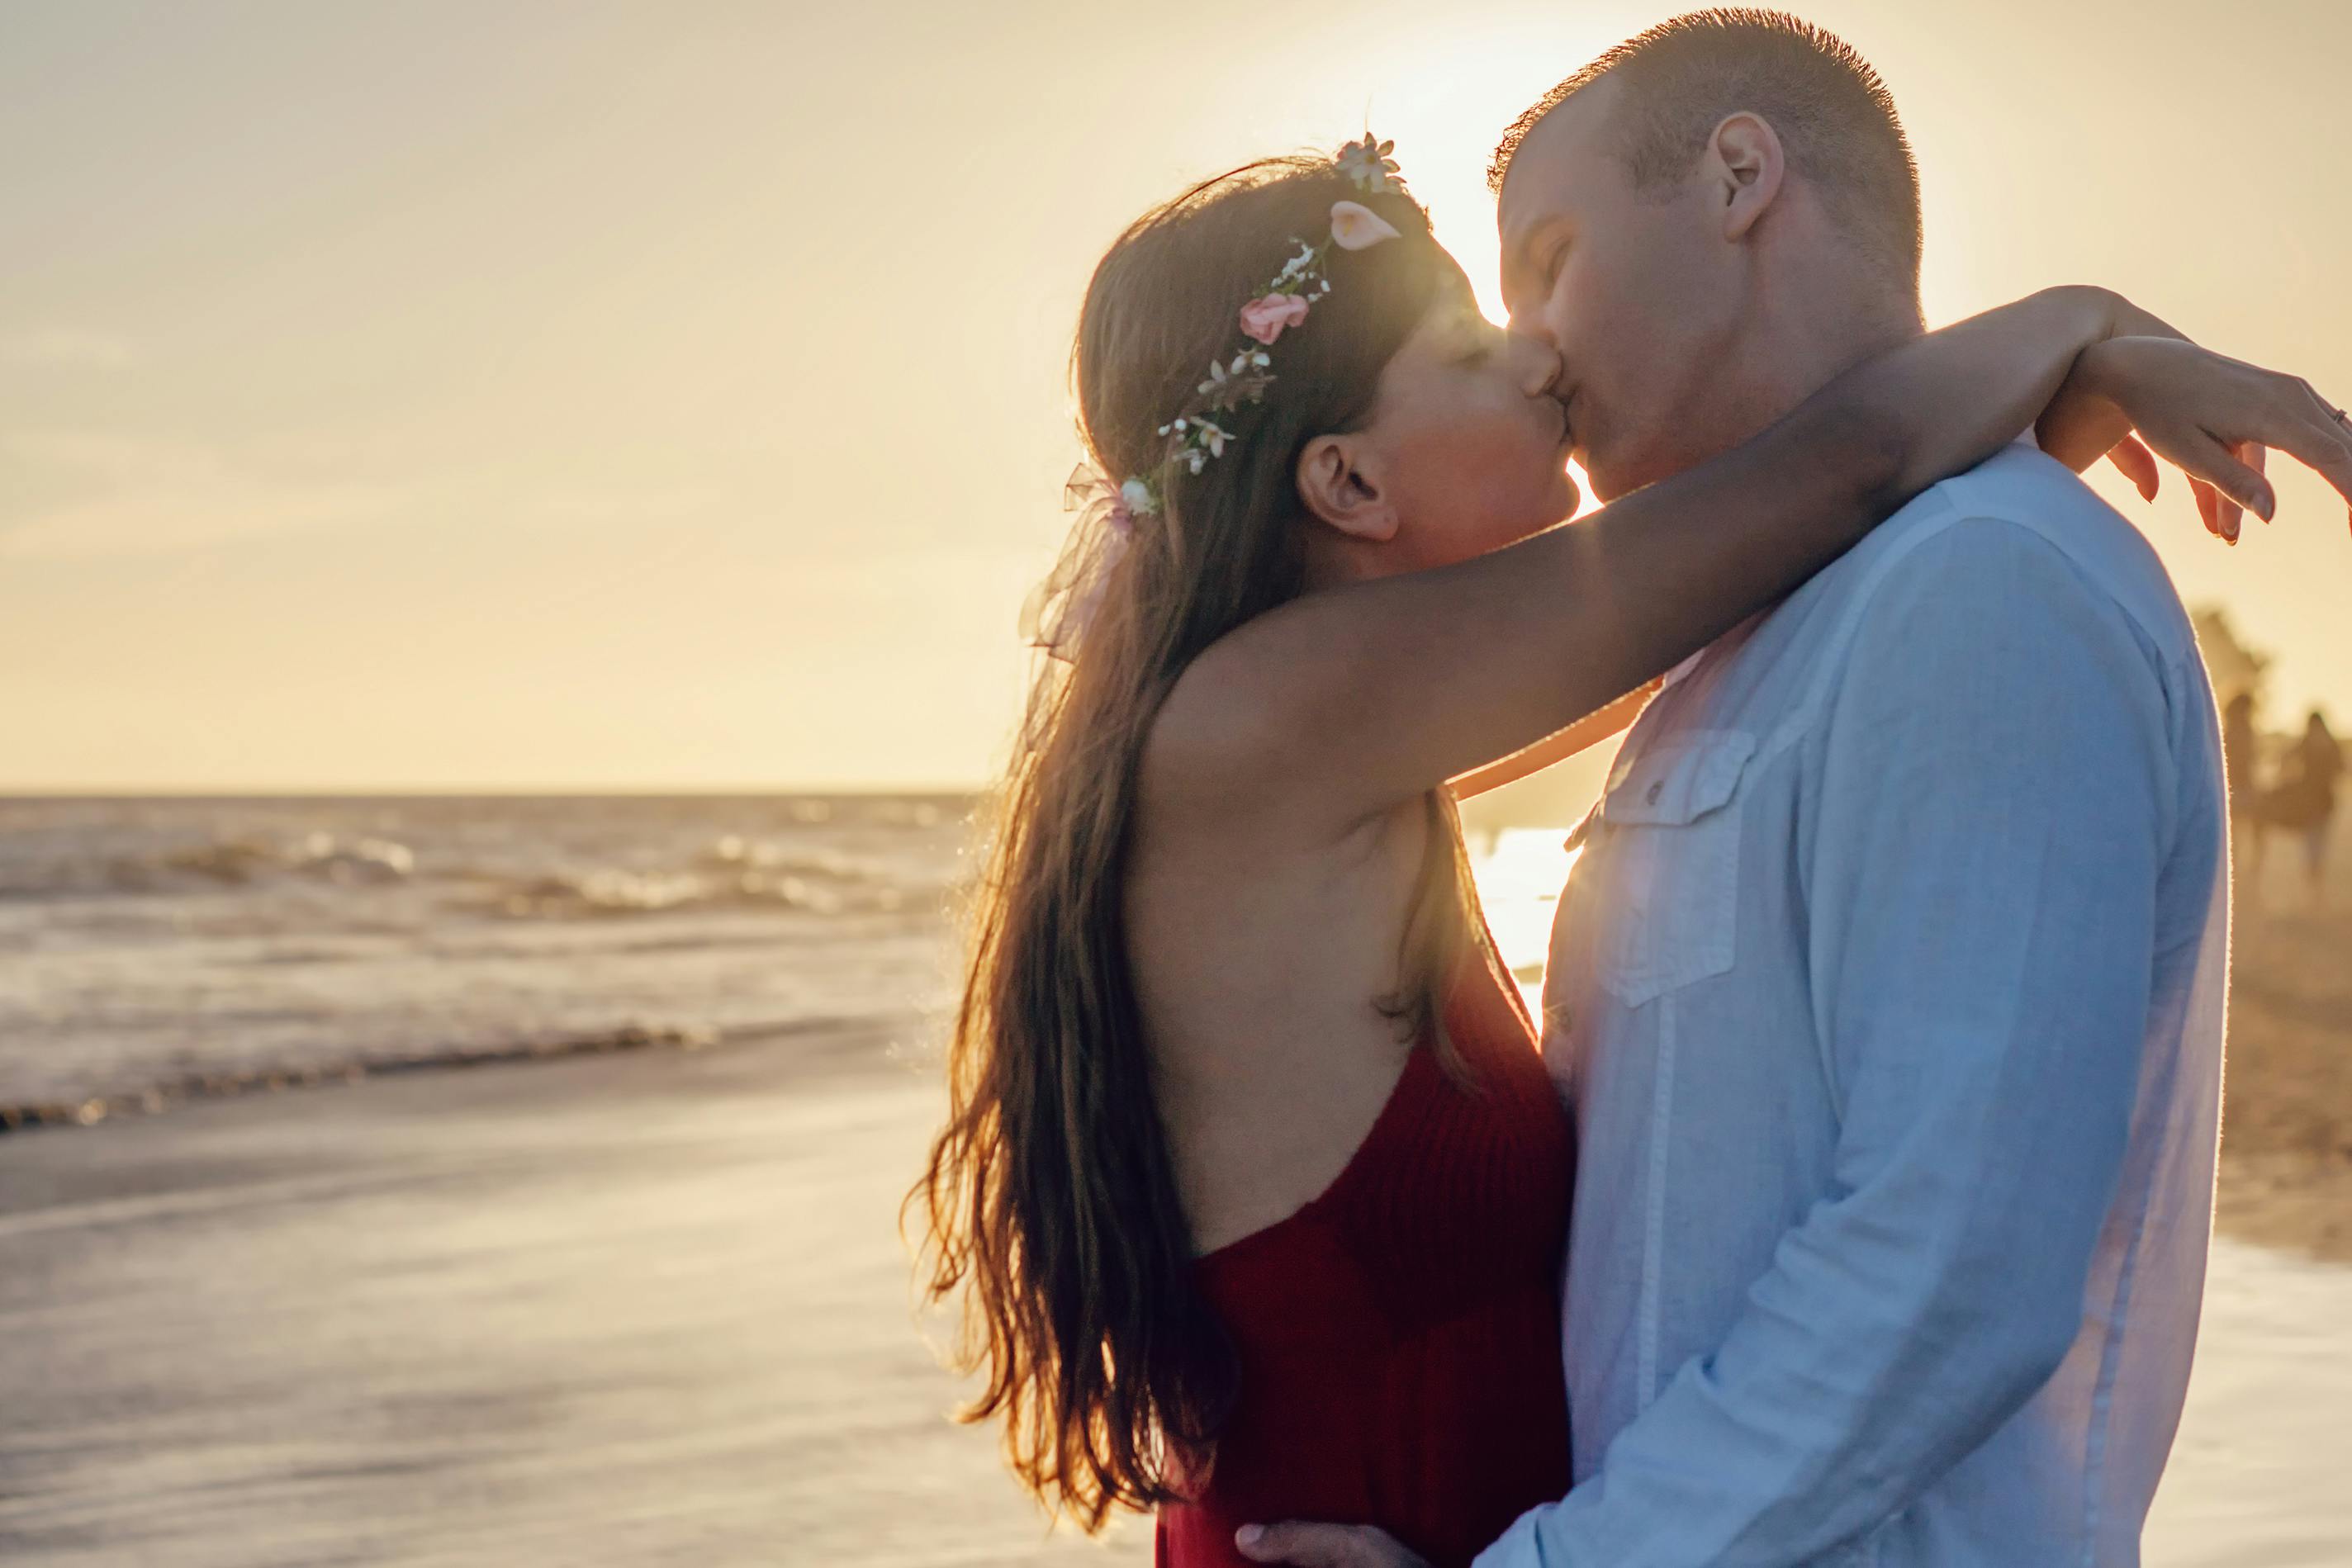 A loved-up couple kissing in front of a sunset at the beach | Source: Pexels